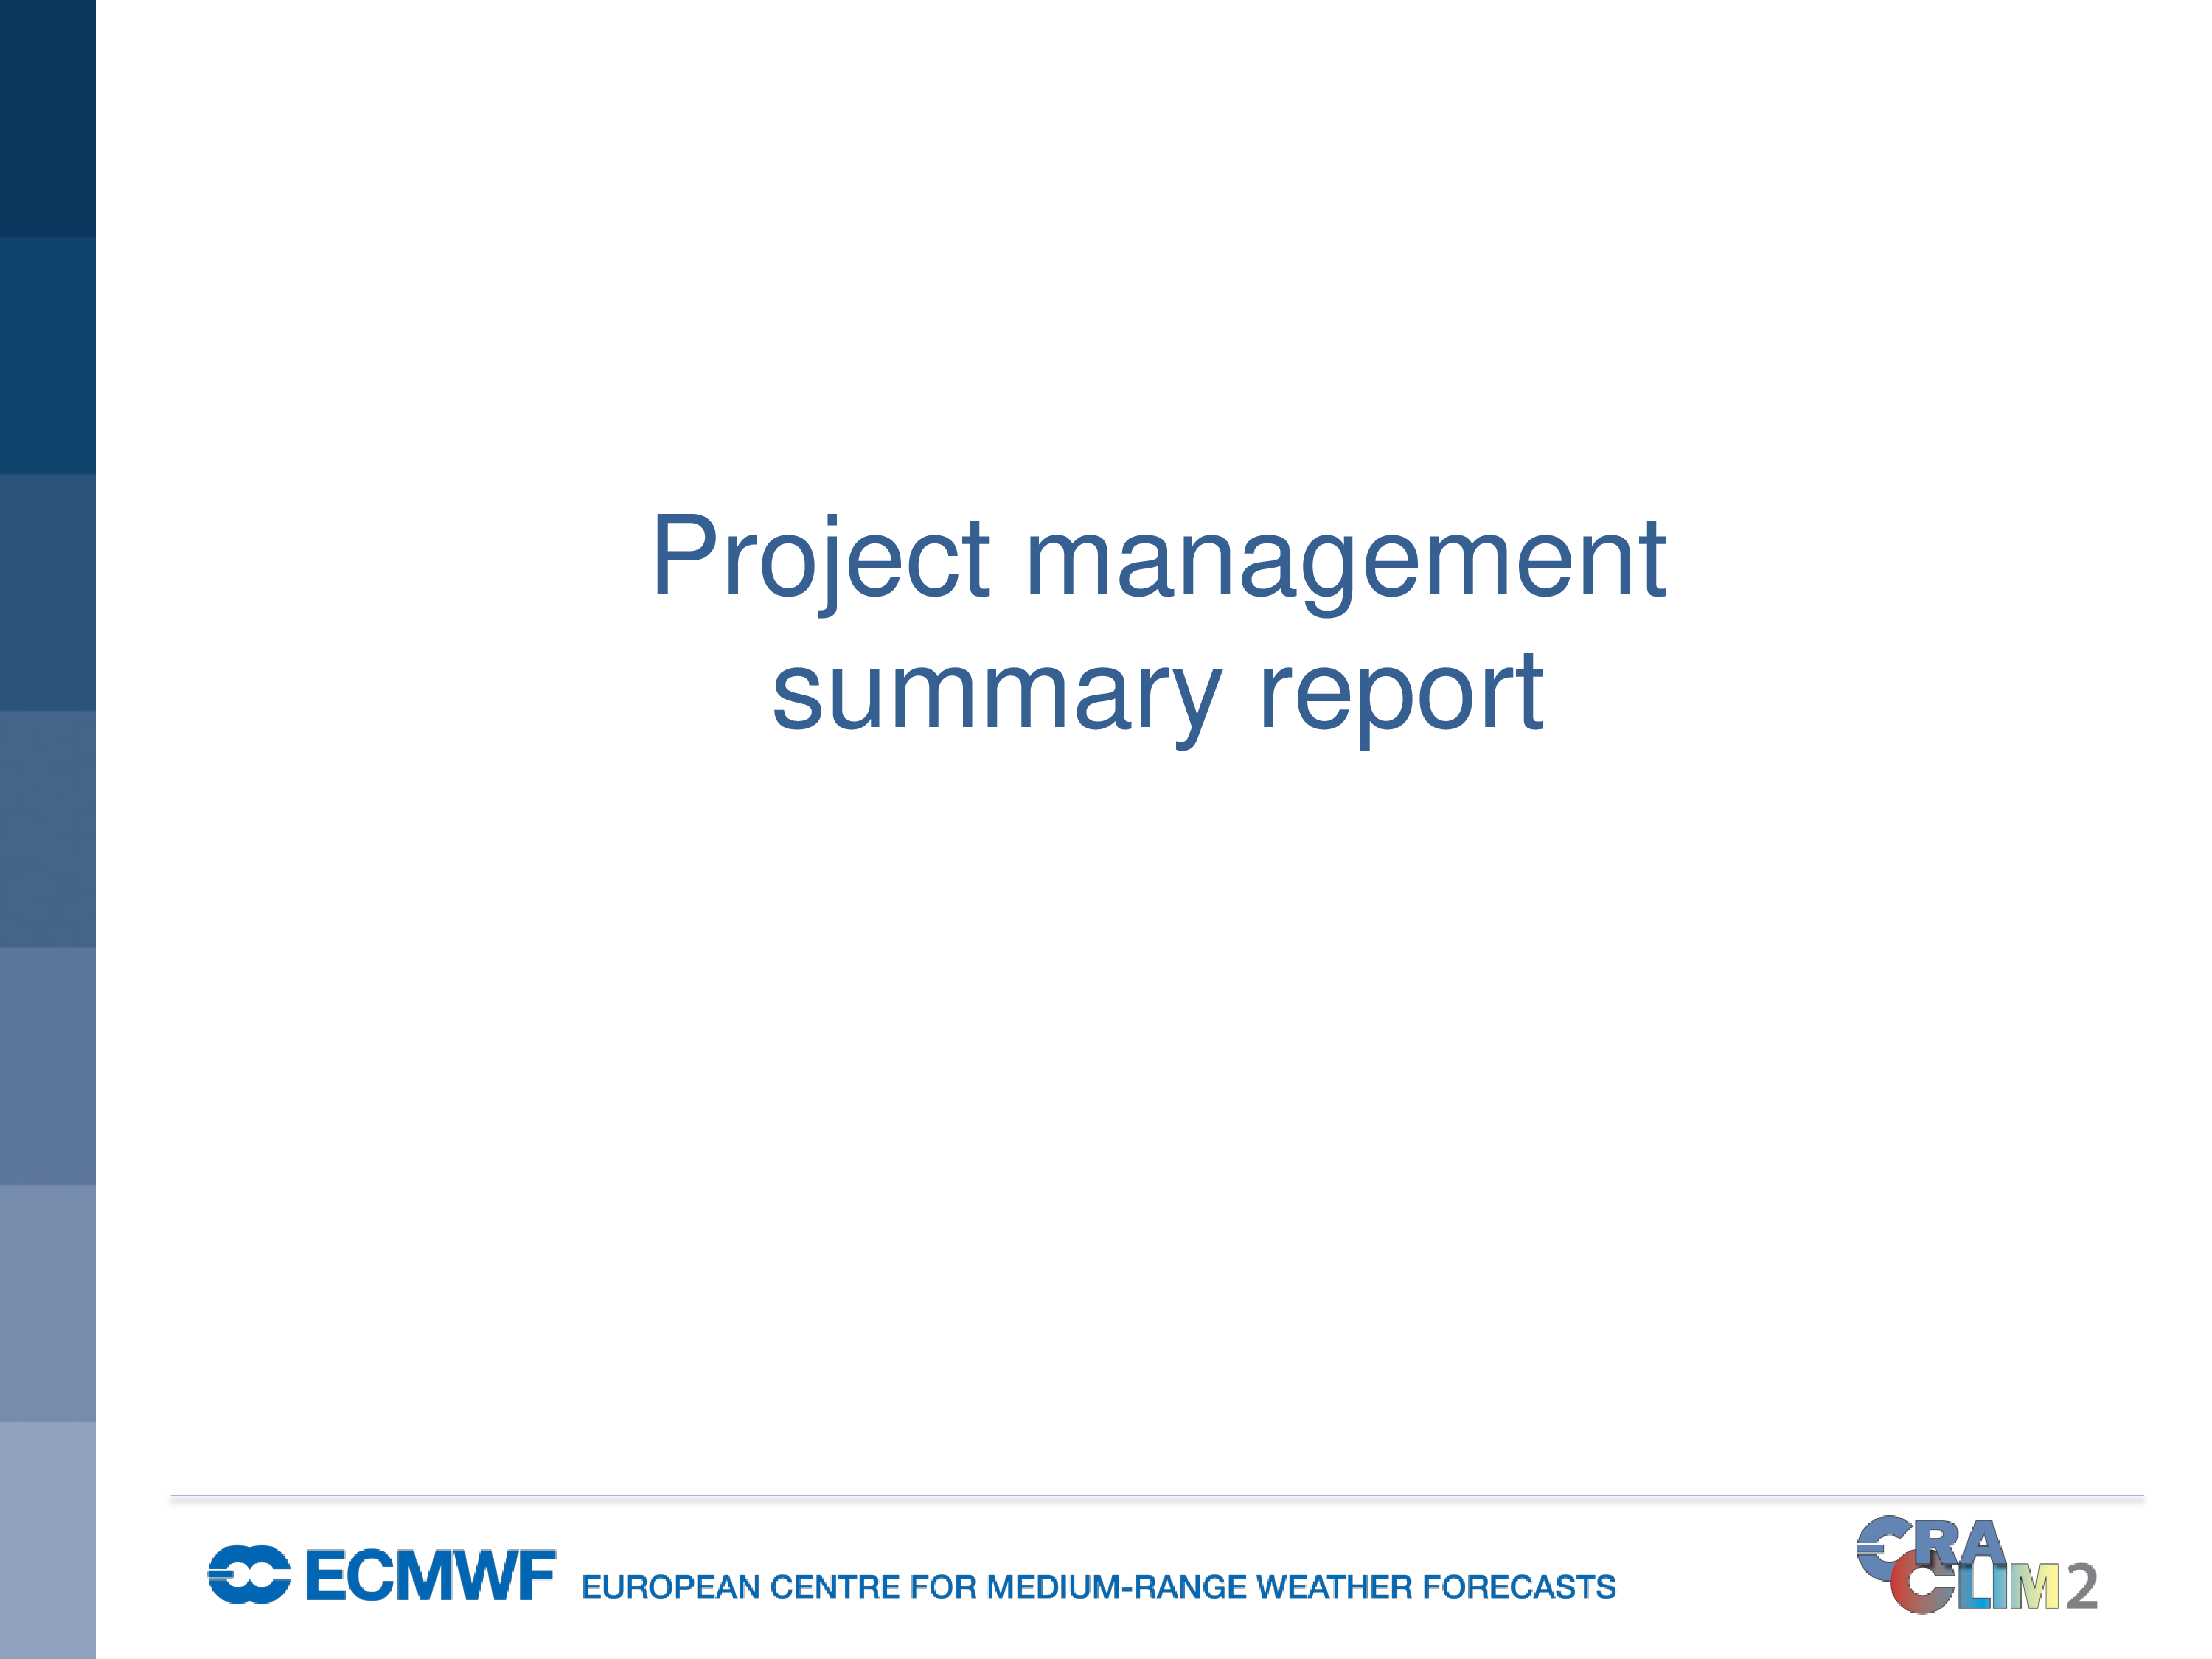 Project Management Summary Report 模板